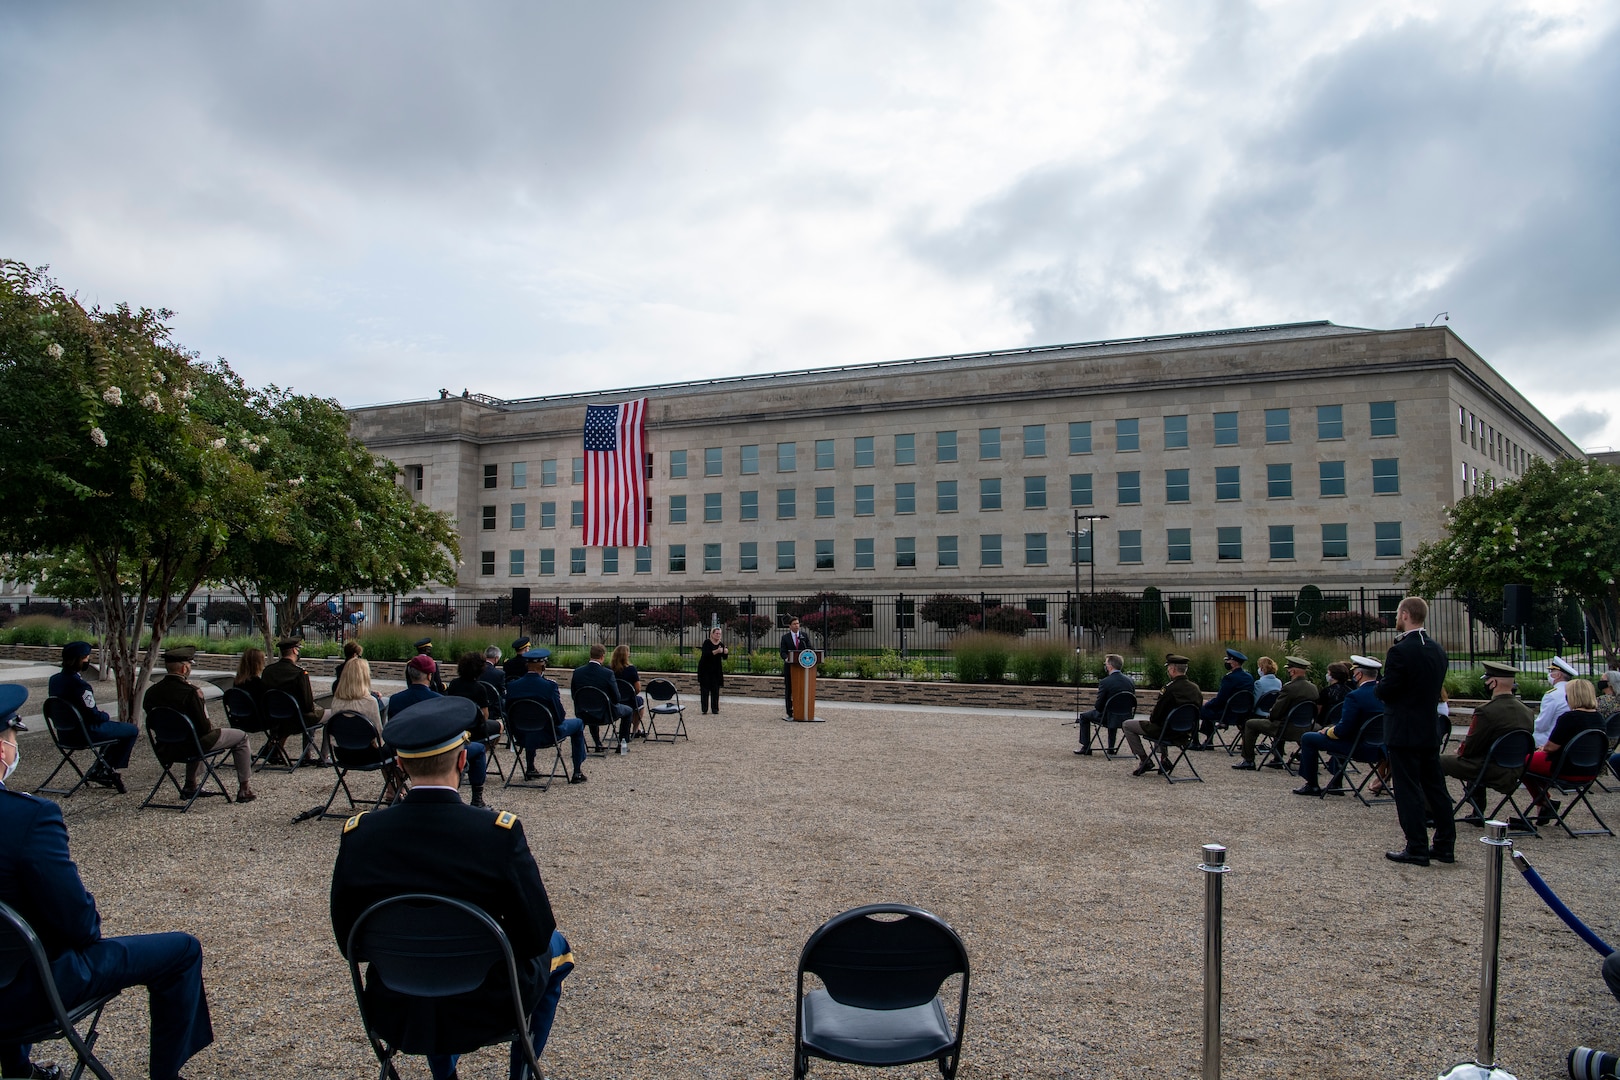 People sit outdoors and listen to someone at a podium; a large building is in the background.